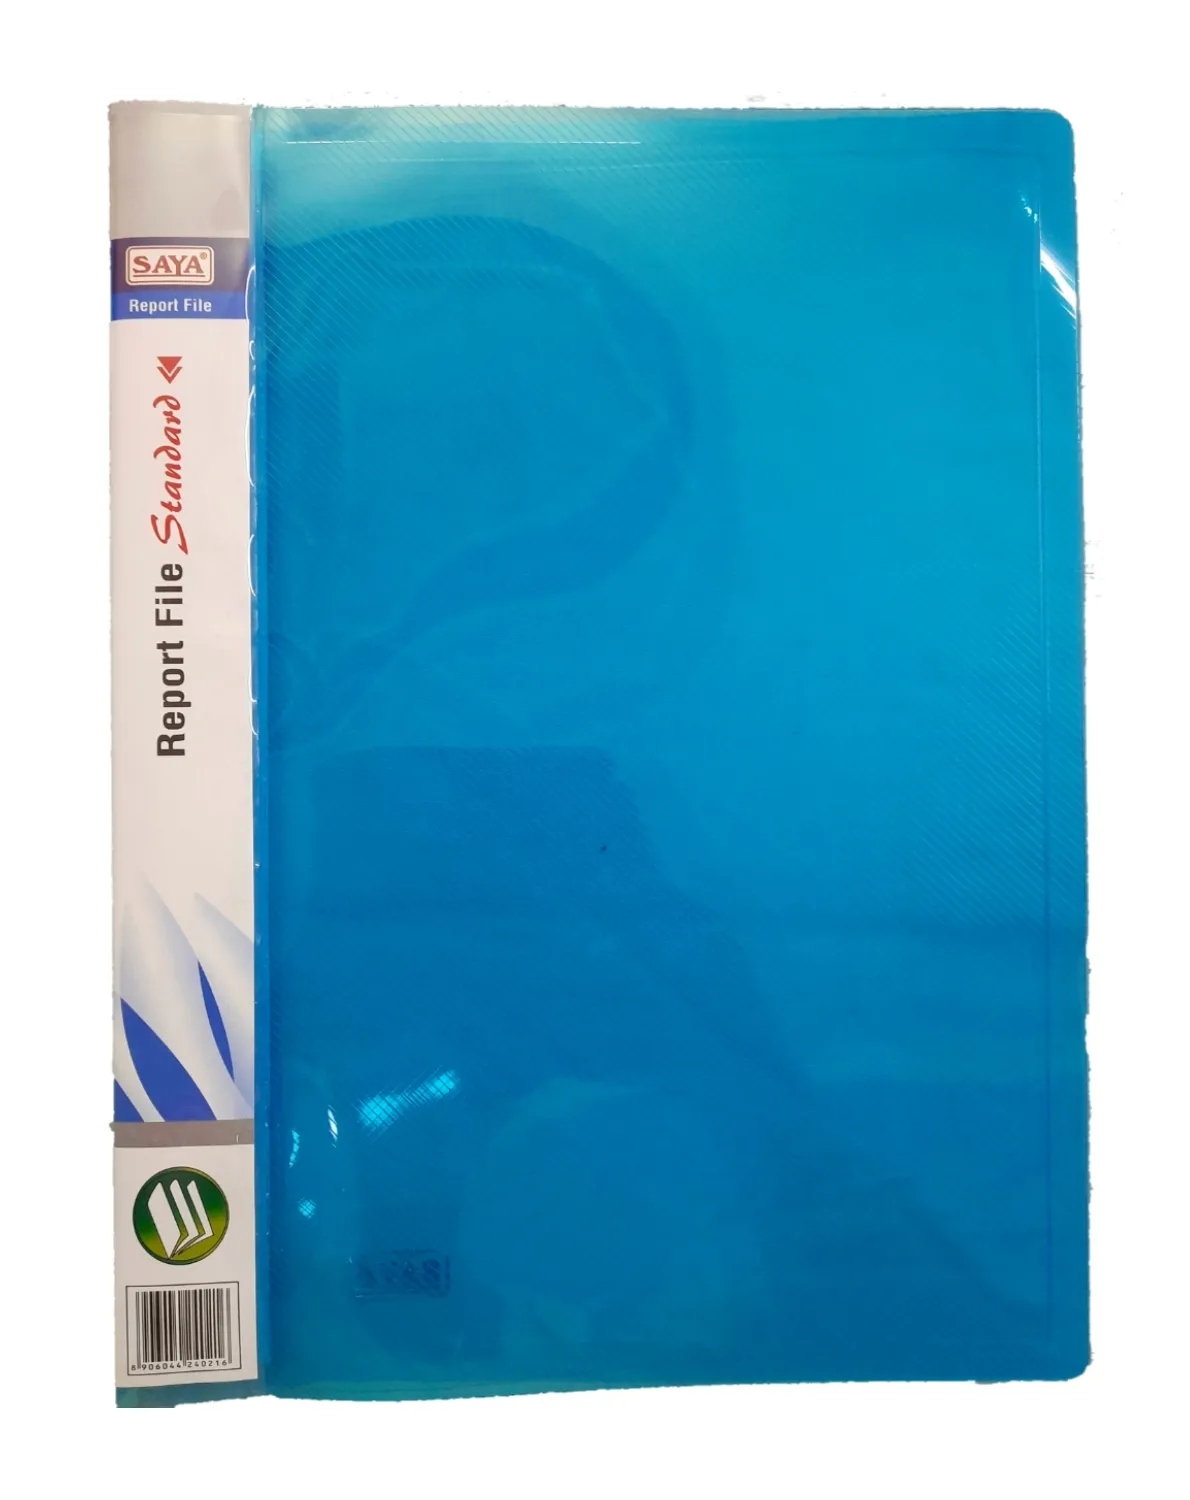 Saya Report File Standard, Office Series, Blue, SY - 101, A4 Size, Pack of 1